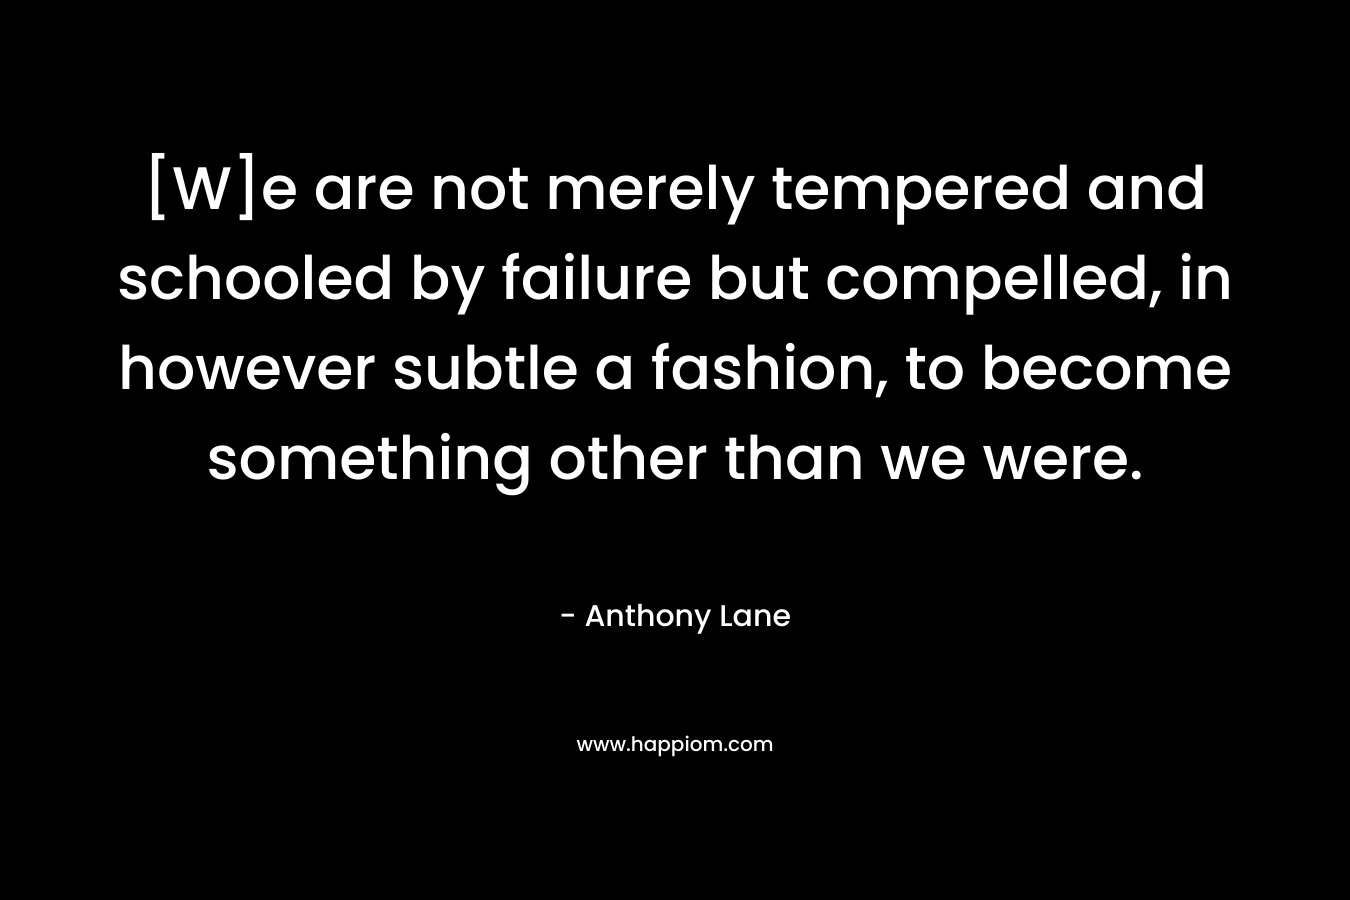 [W]e are not merely tempered and schooled by failure but compelled, in however subtle a fashion, to become something other than we were. – Anthony Lane